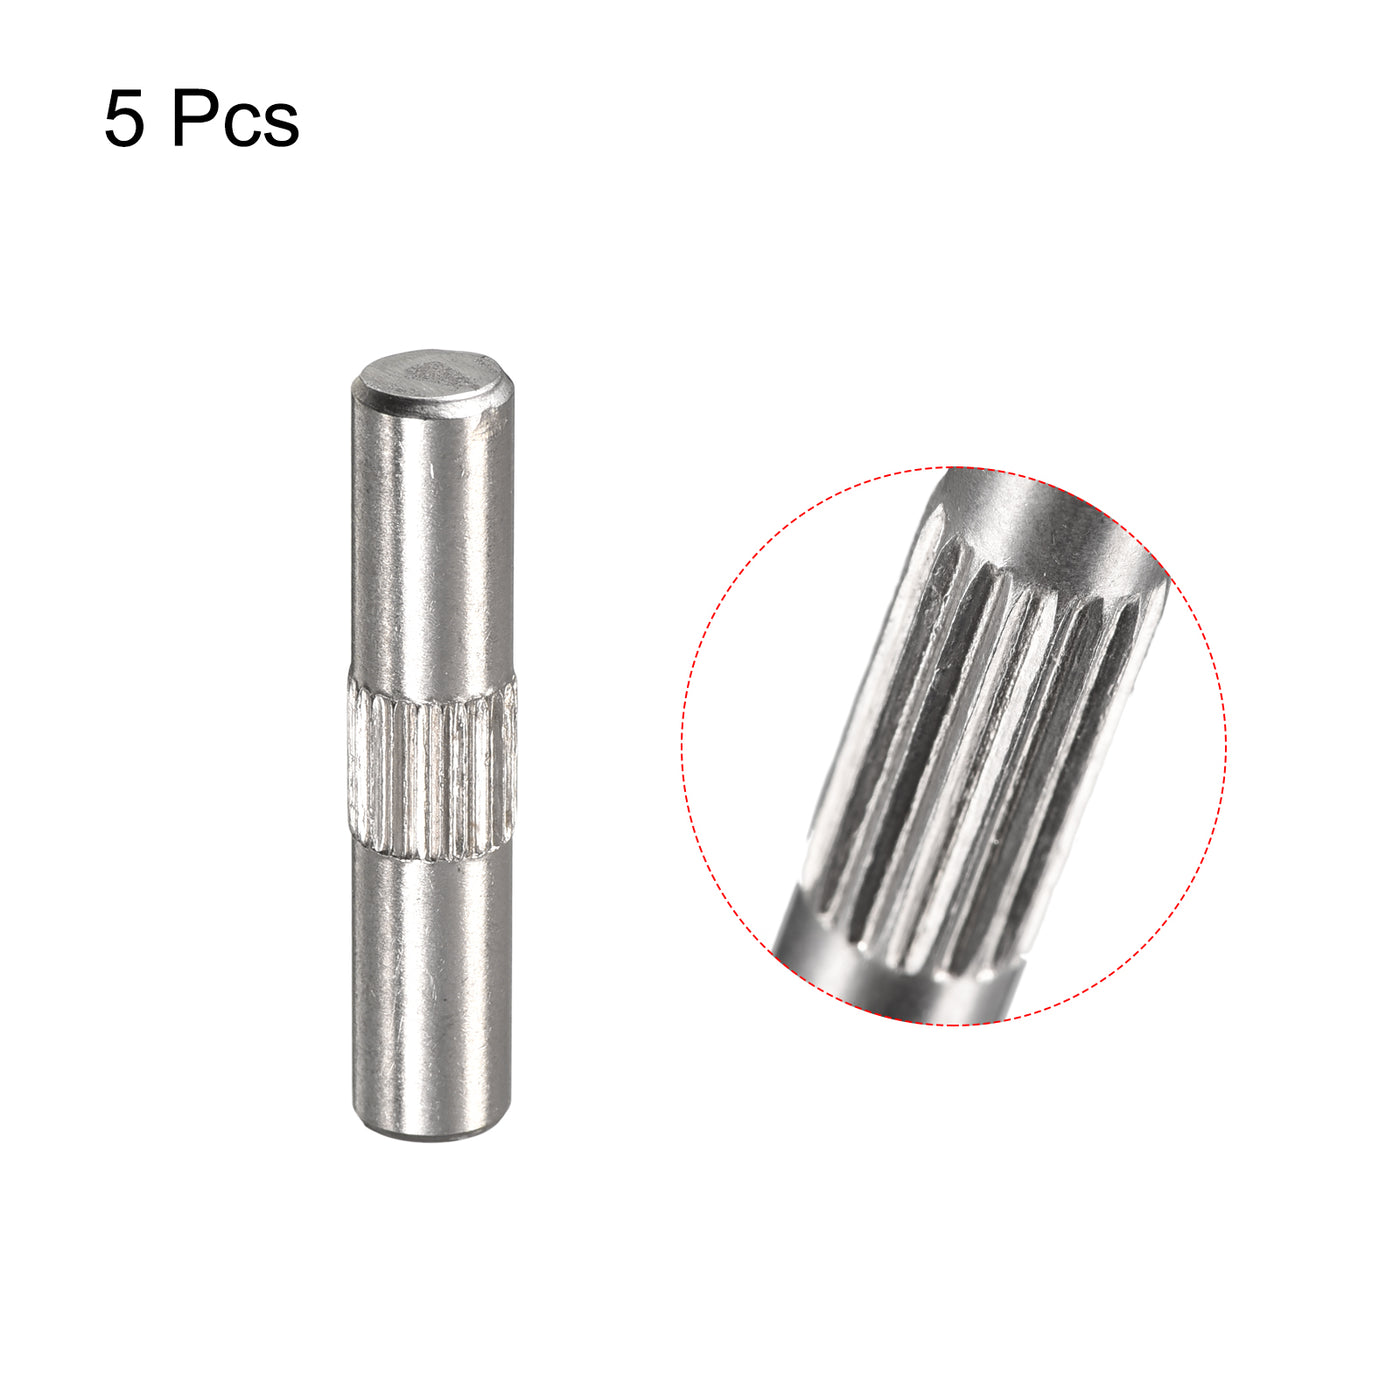 uxcell Uxcell 5x25mm 304 Stainless Steel Dowel Pins, 5Pcs Center Knurled Chamfered End Pin